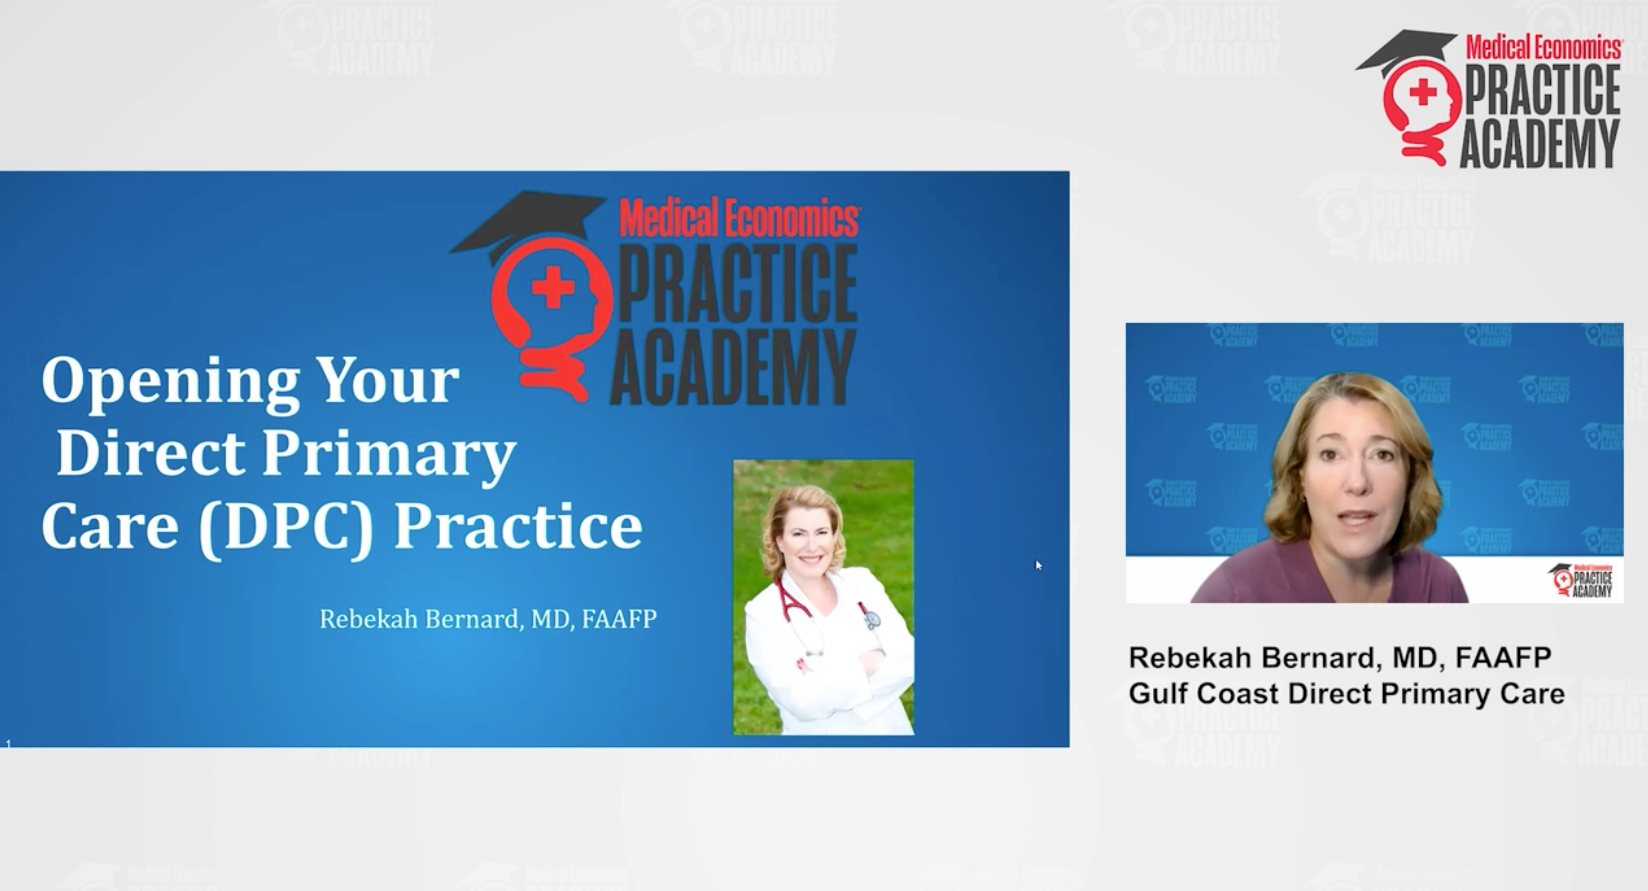 Opening a new practice